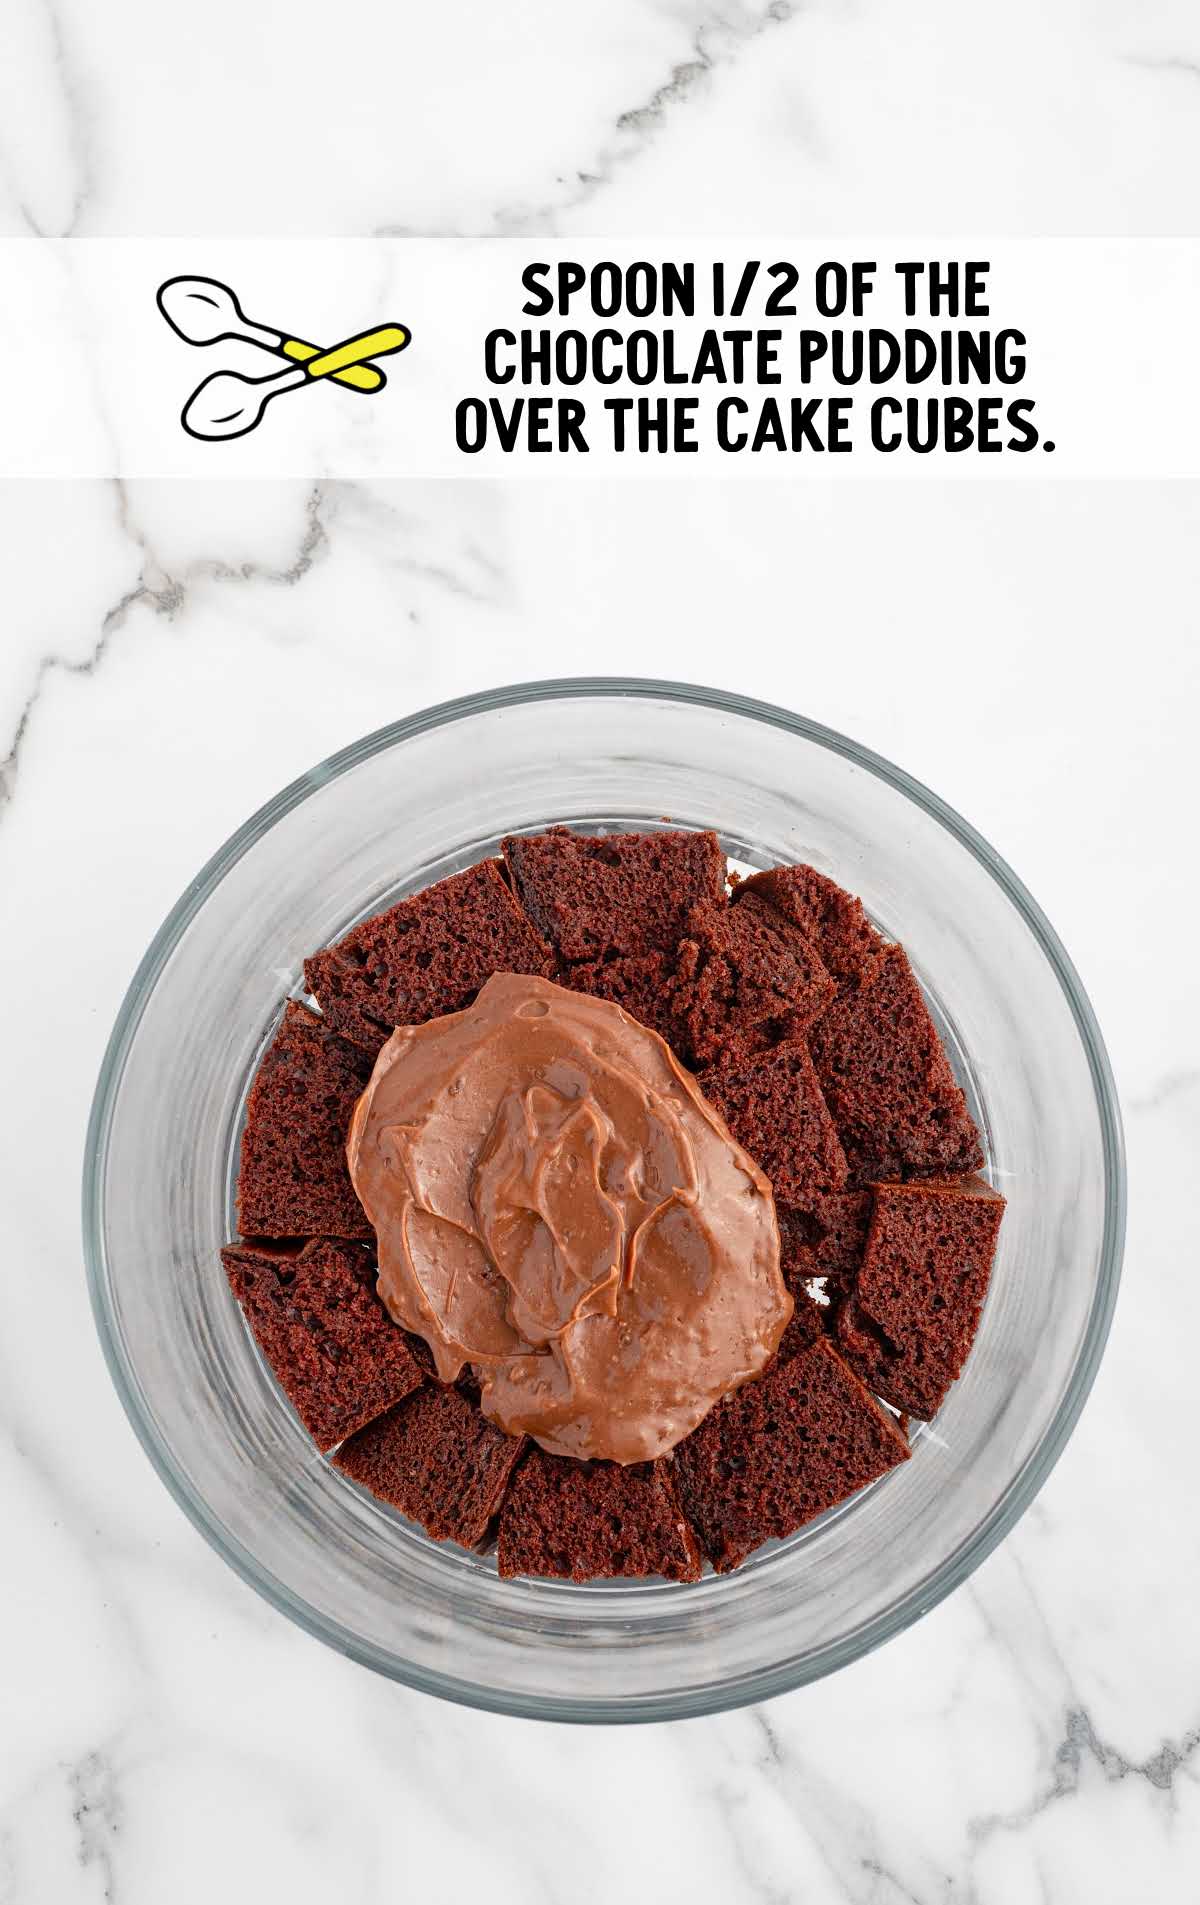 chocolate pudding spooned over the cake cubes